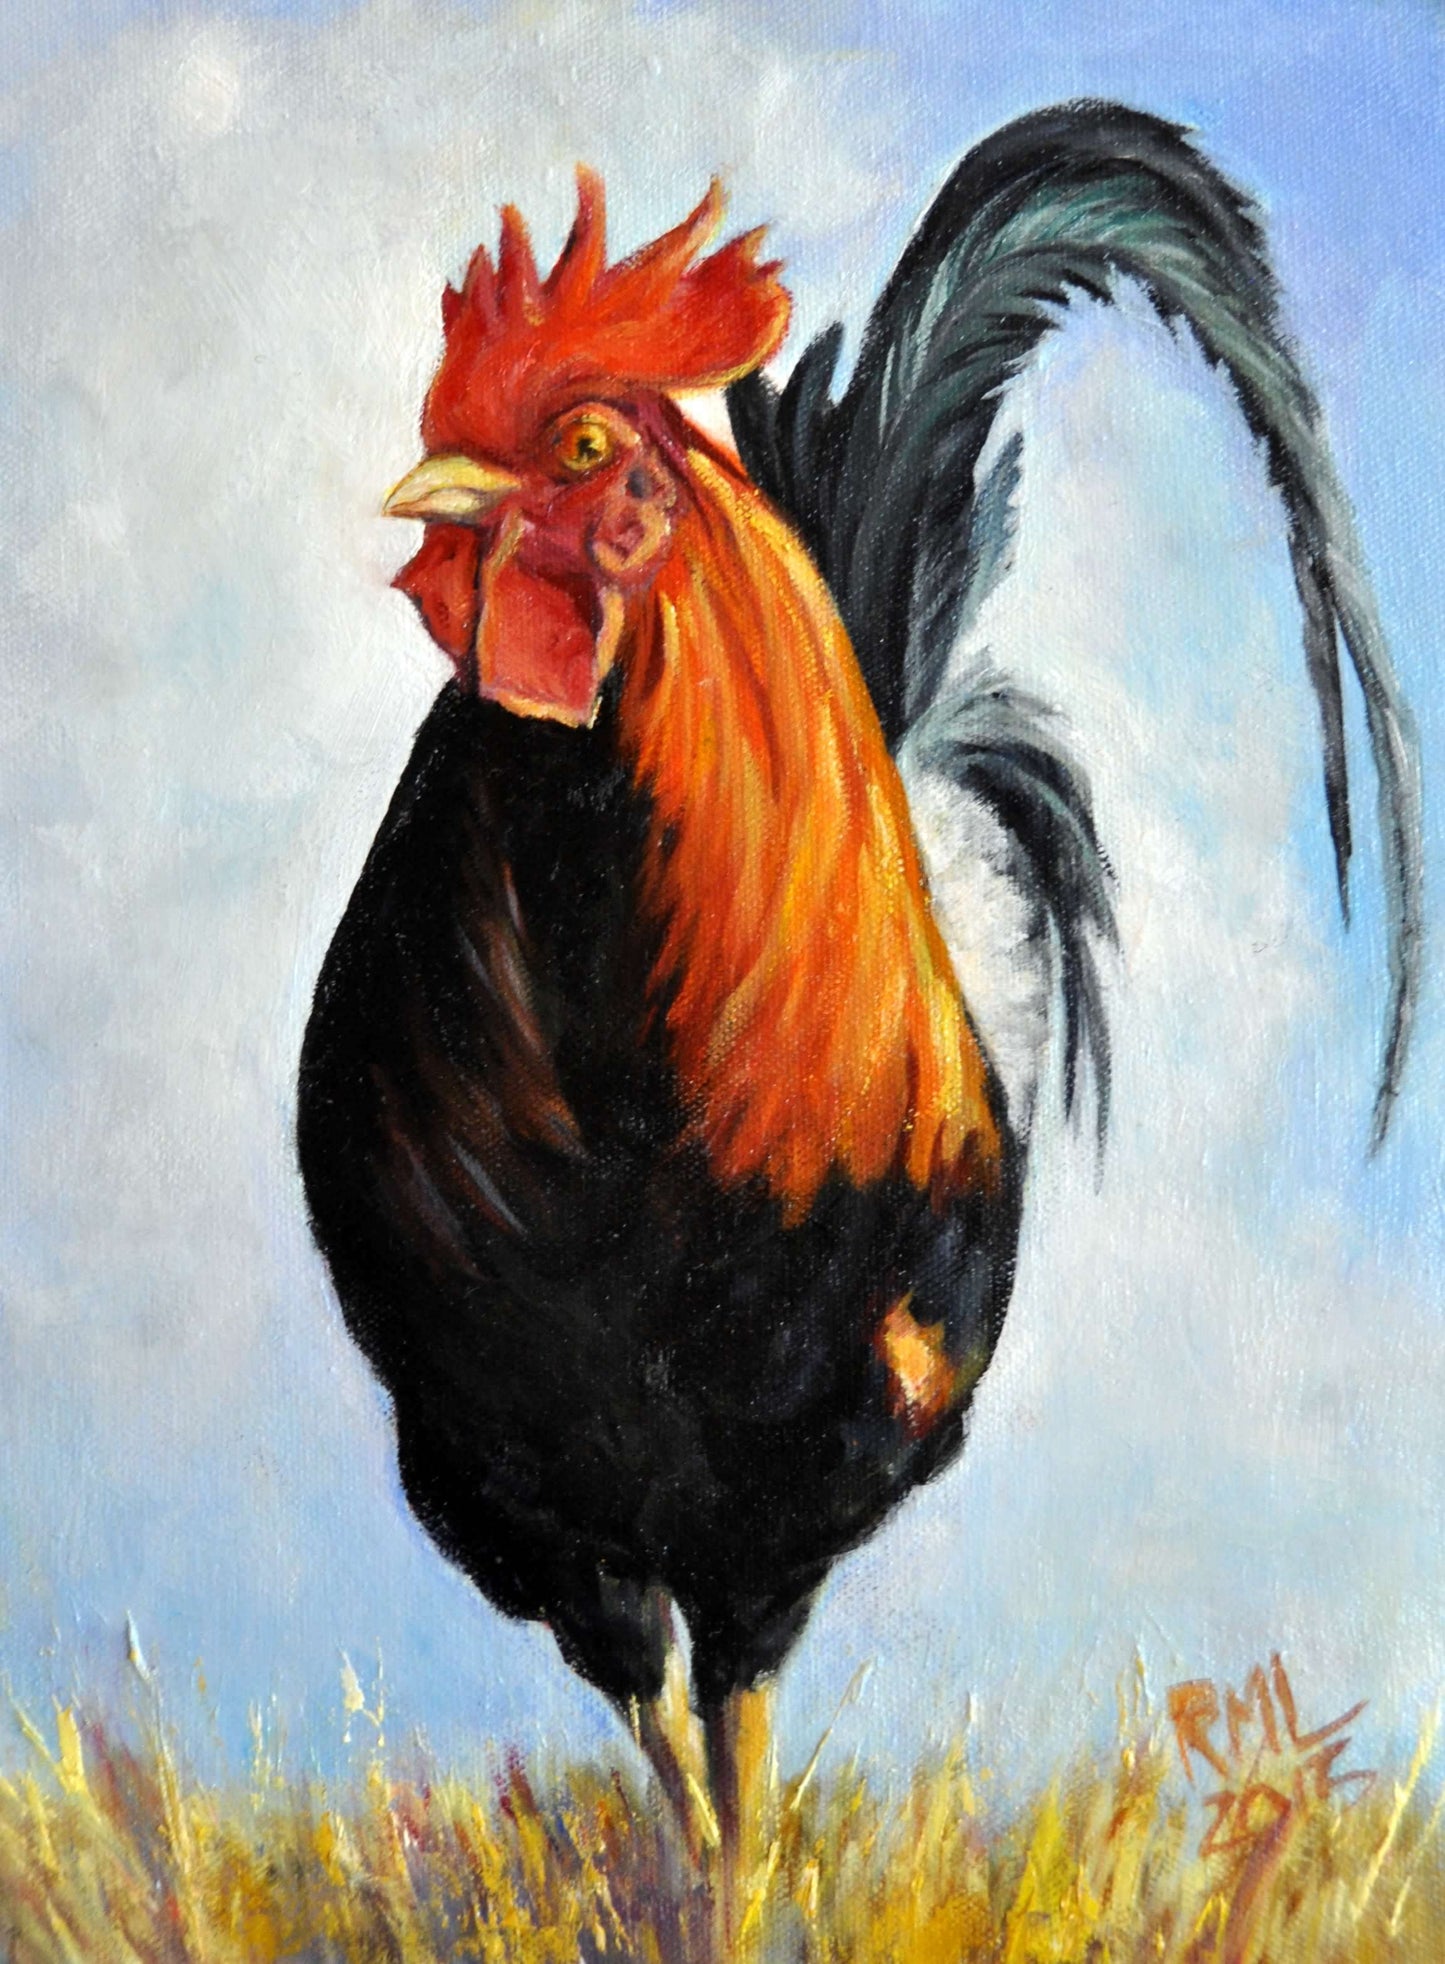 " Cyndie's Rooster " Print Artist: Renee Laegreid Beautiful rooster standing with a blue sky behind  Choose From:  Print  8" x 10" giclee print matted in an 11" x 14" black matting  Ready for a frame of your choice  Greeting Card